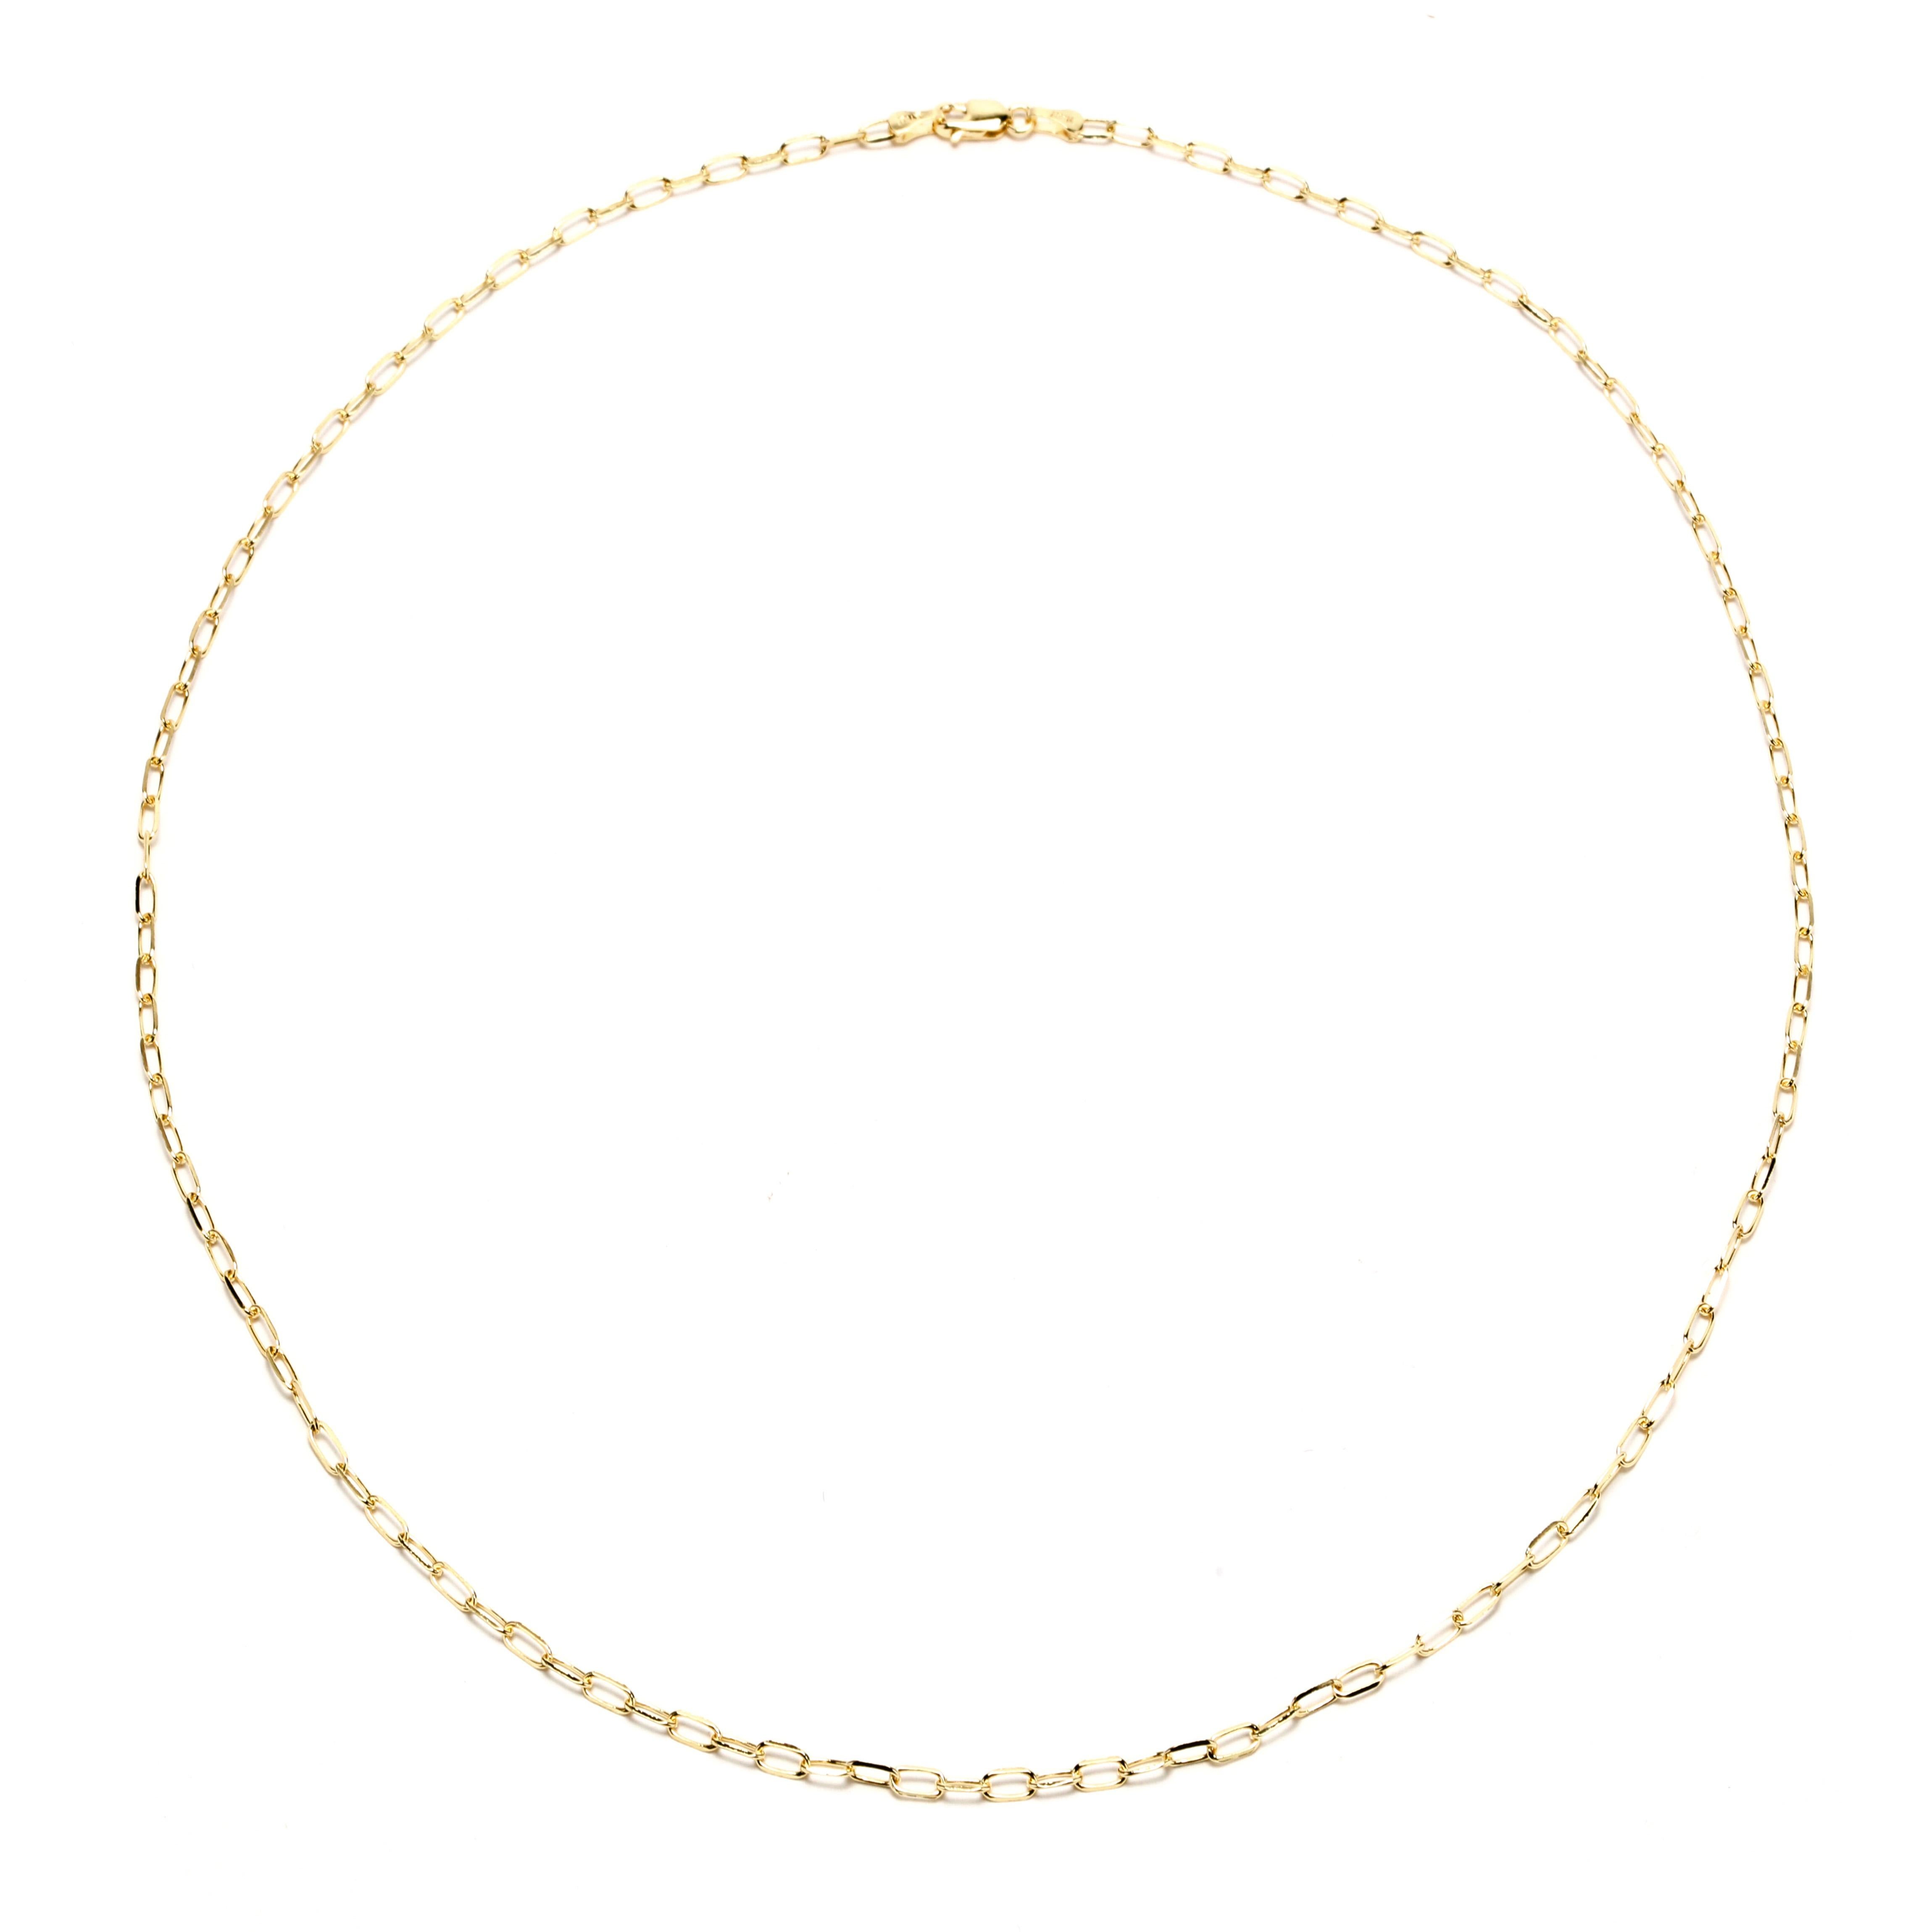 Men's 24 inch - Italian 14 Karat Yellow Gold Small Paperclip Chain Necklace, Trendy